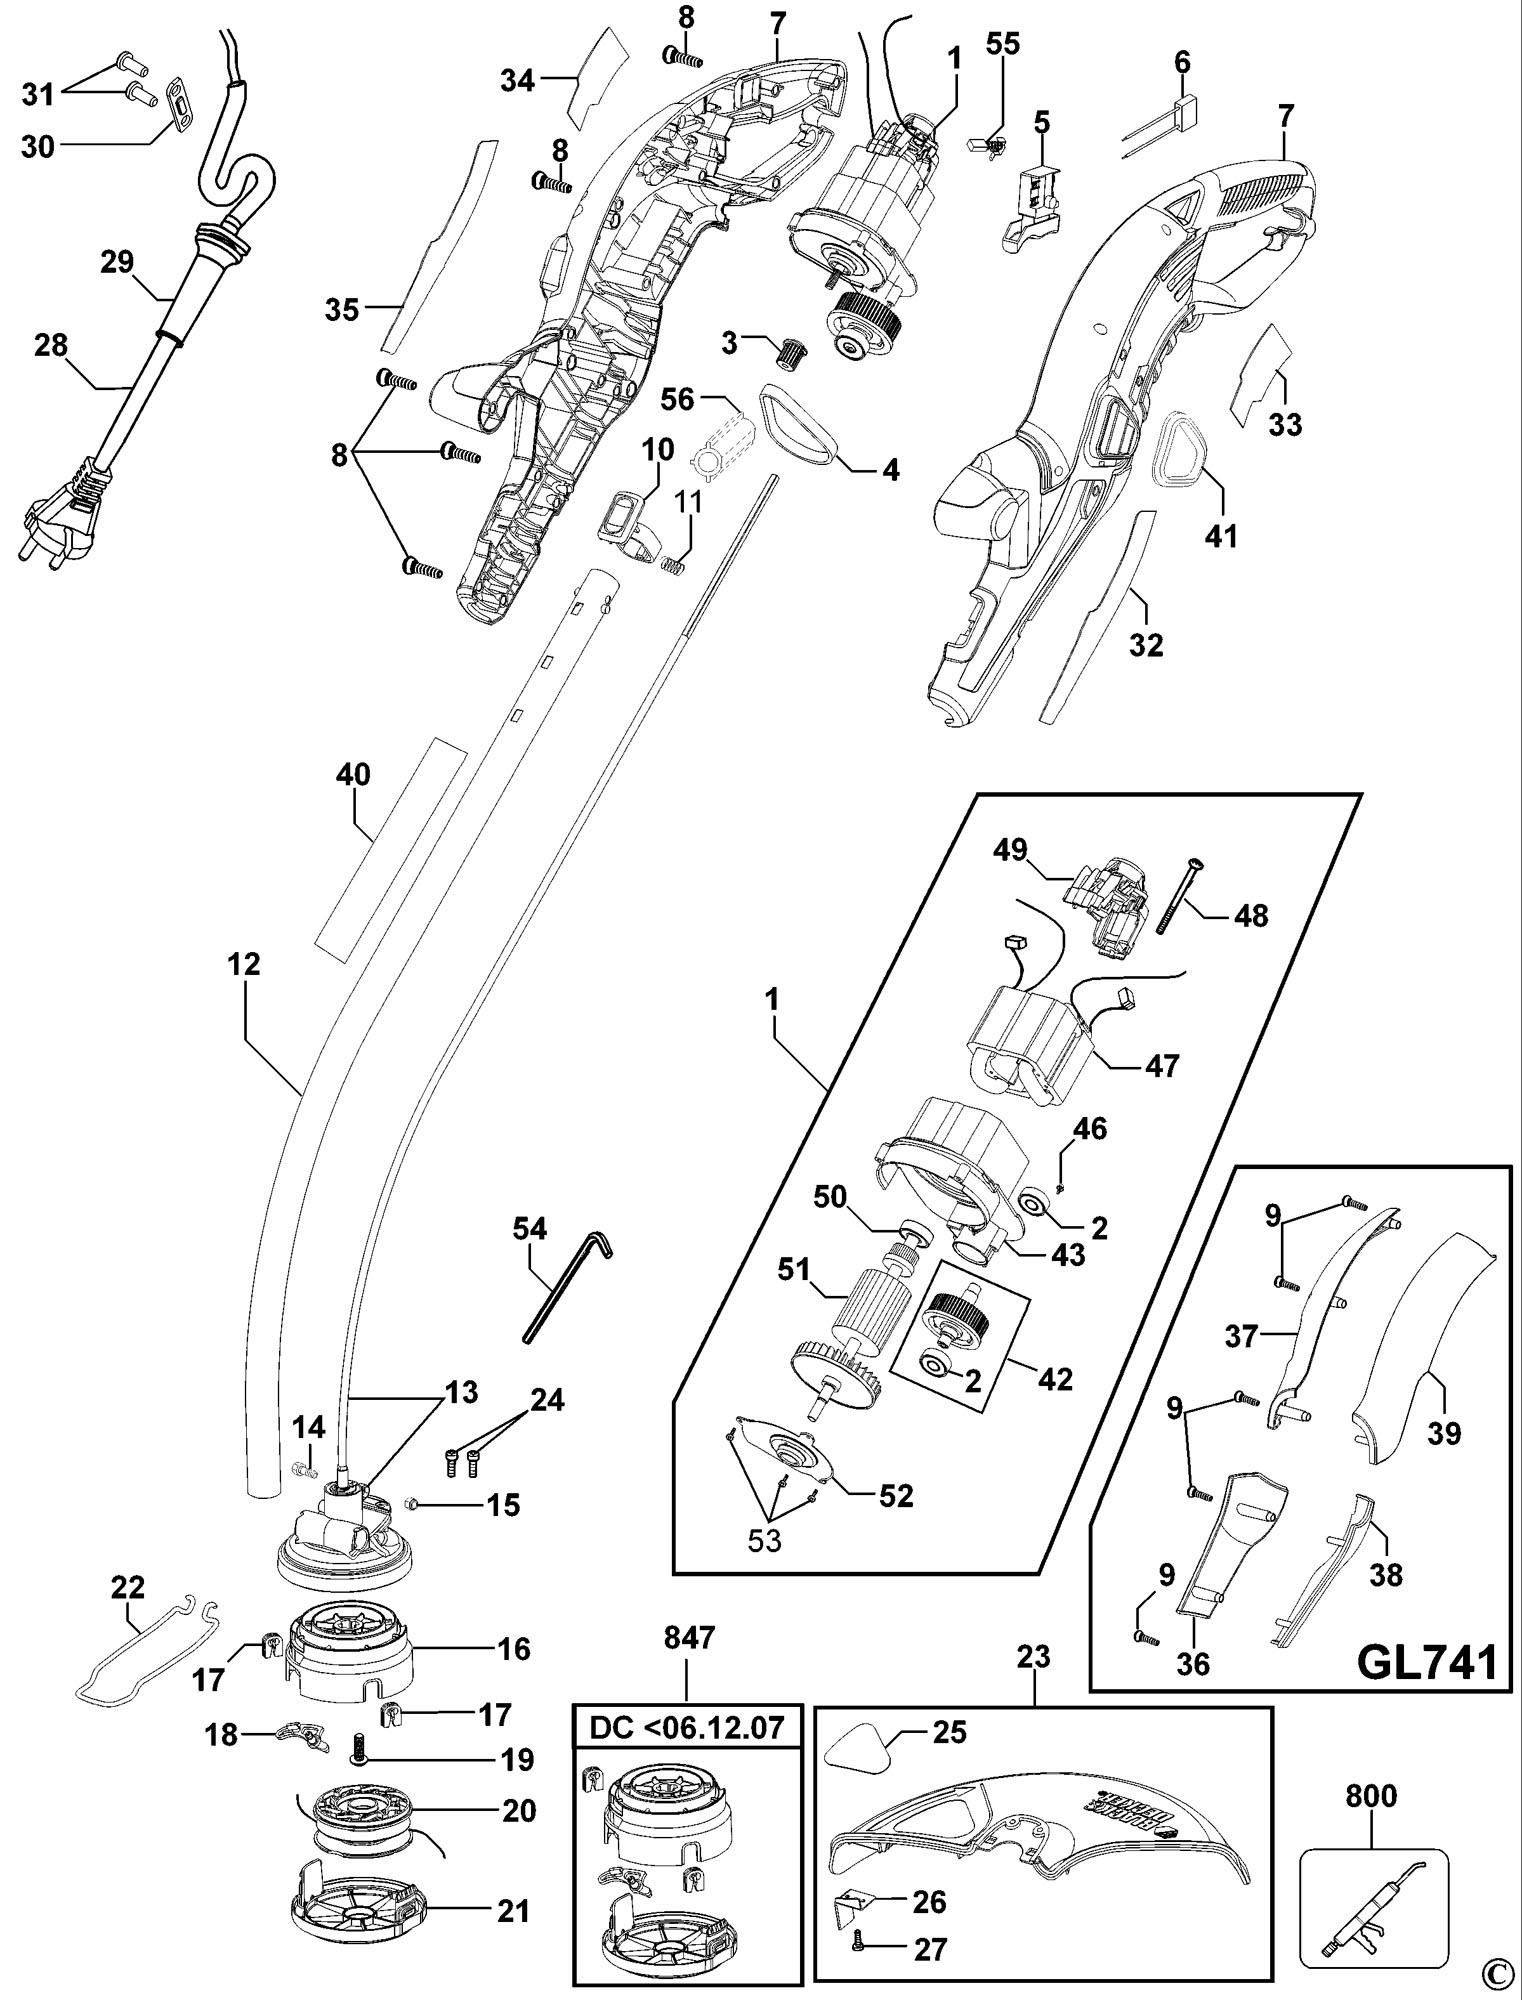 parts for black and decker strimmer